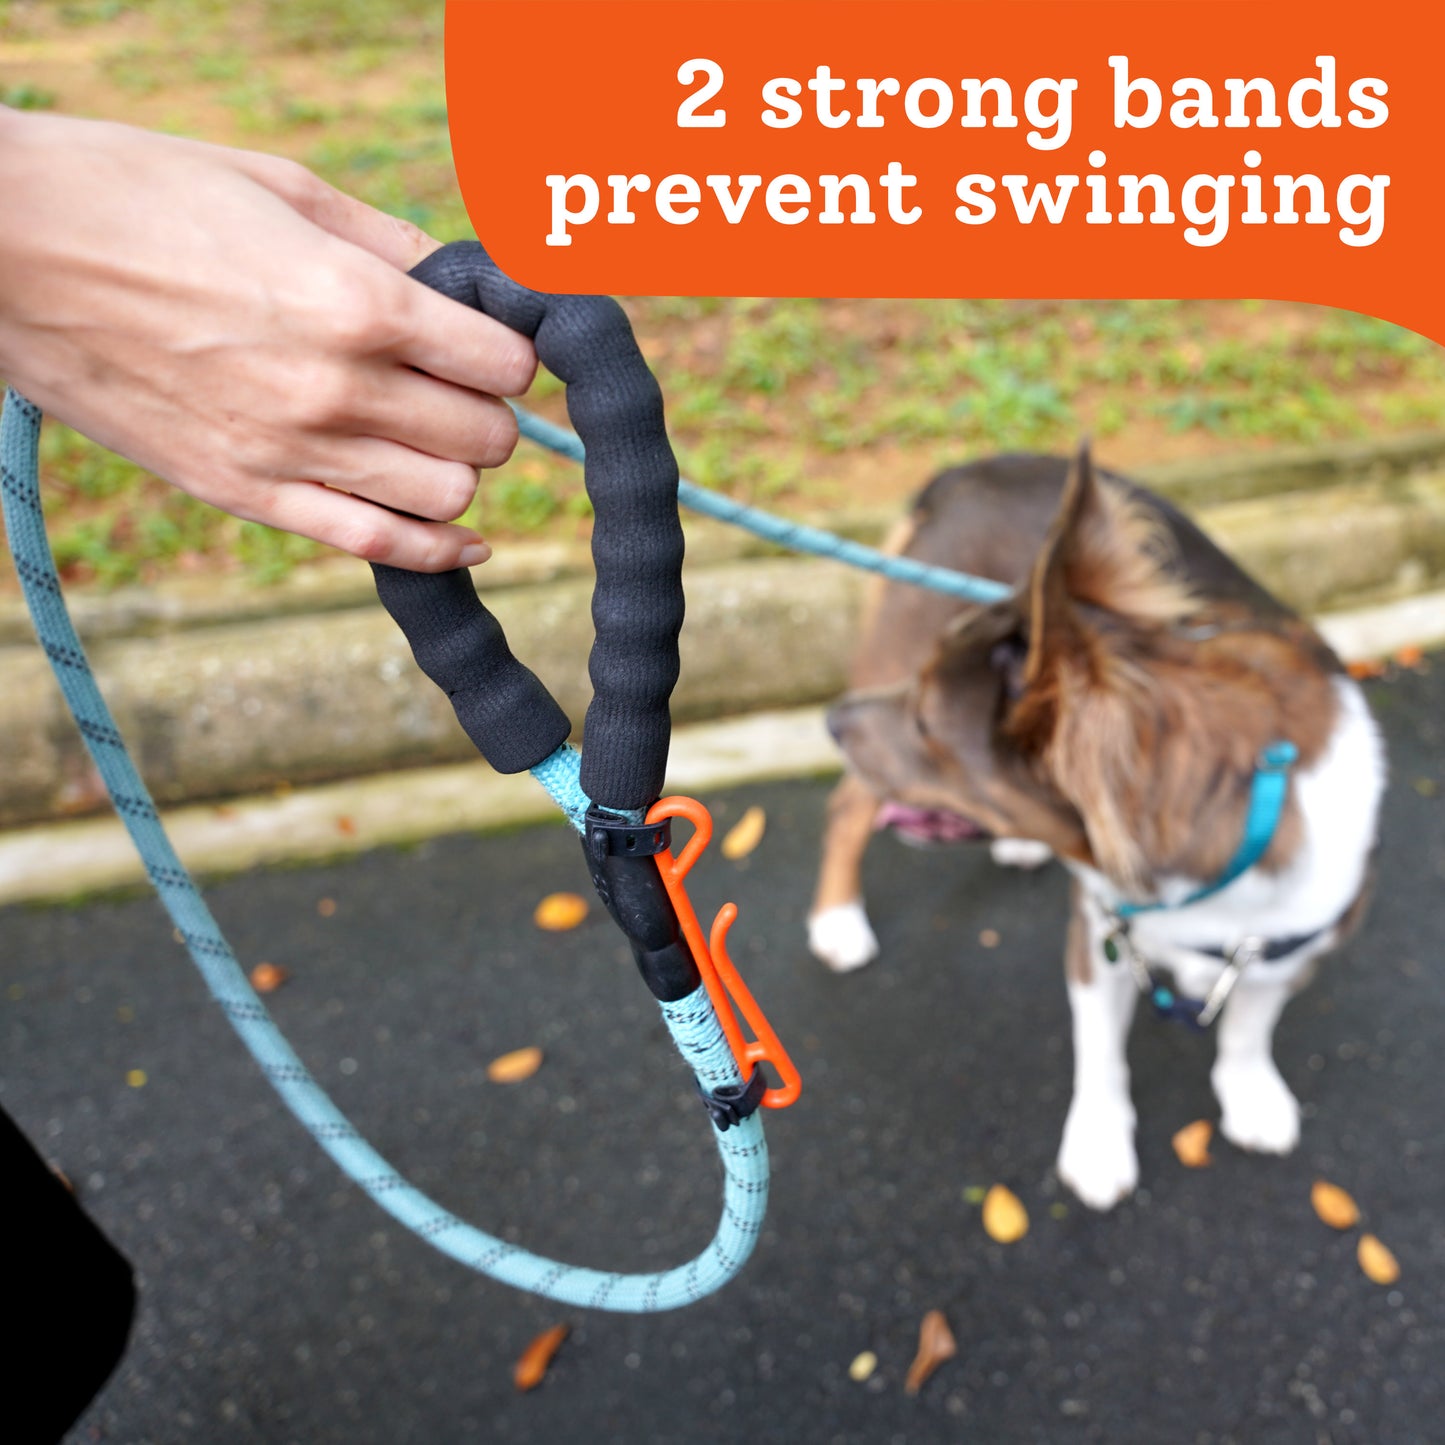 2 strong bands prevent swinging